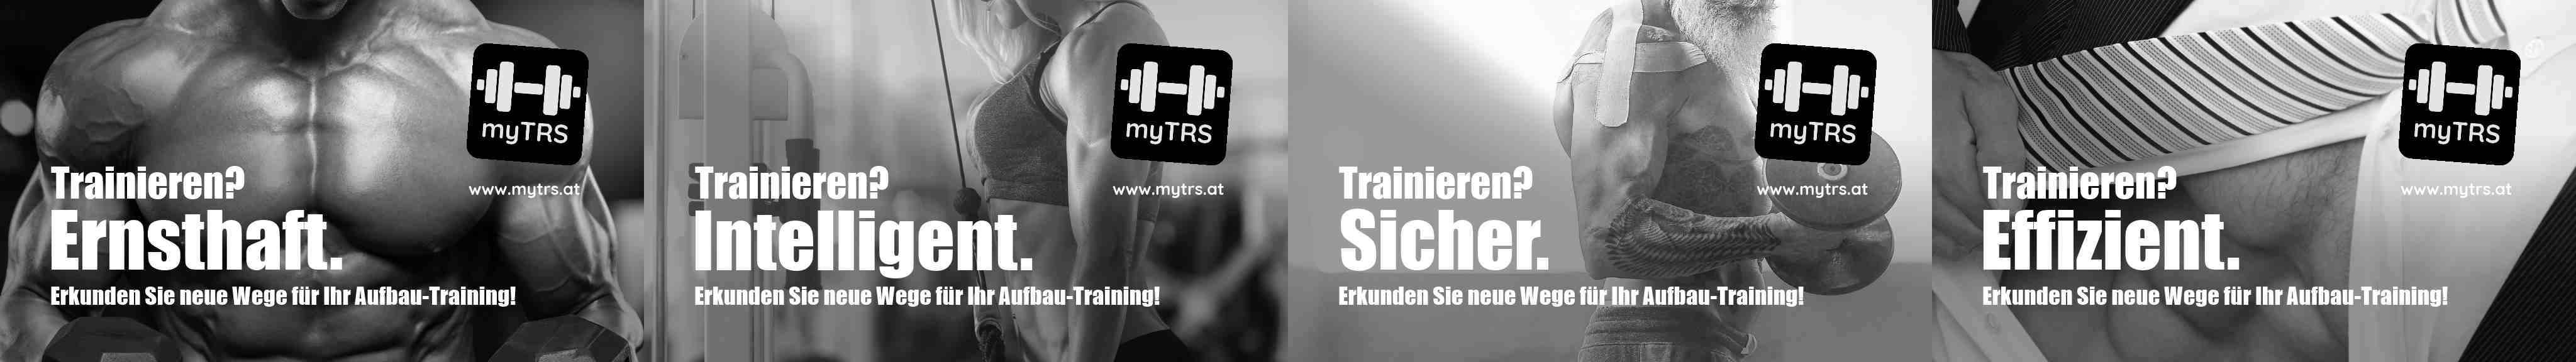 myTRS: Online tool for muscle build-up and weight training